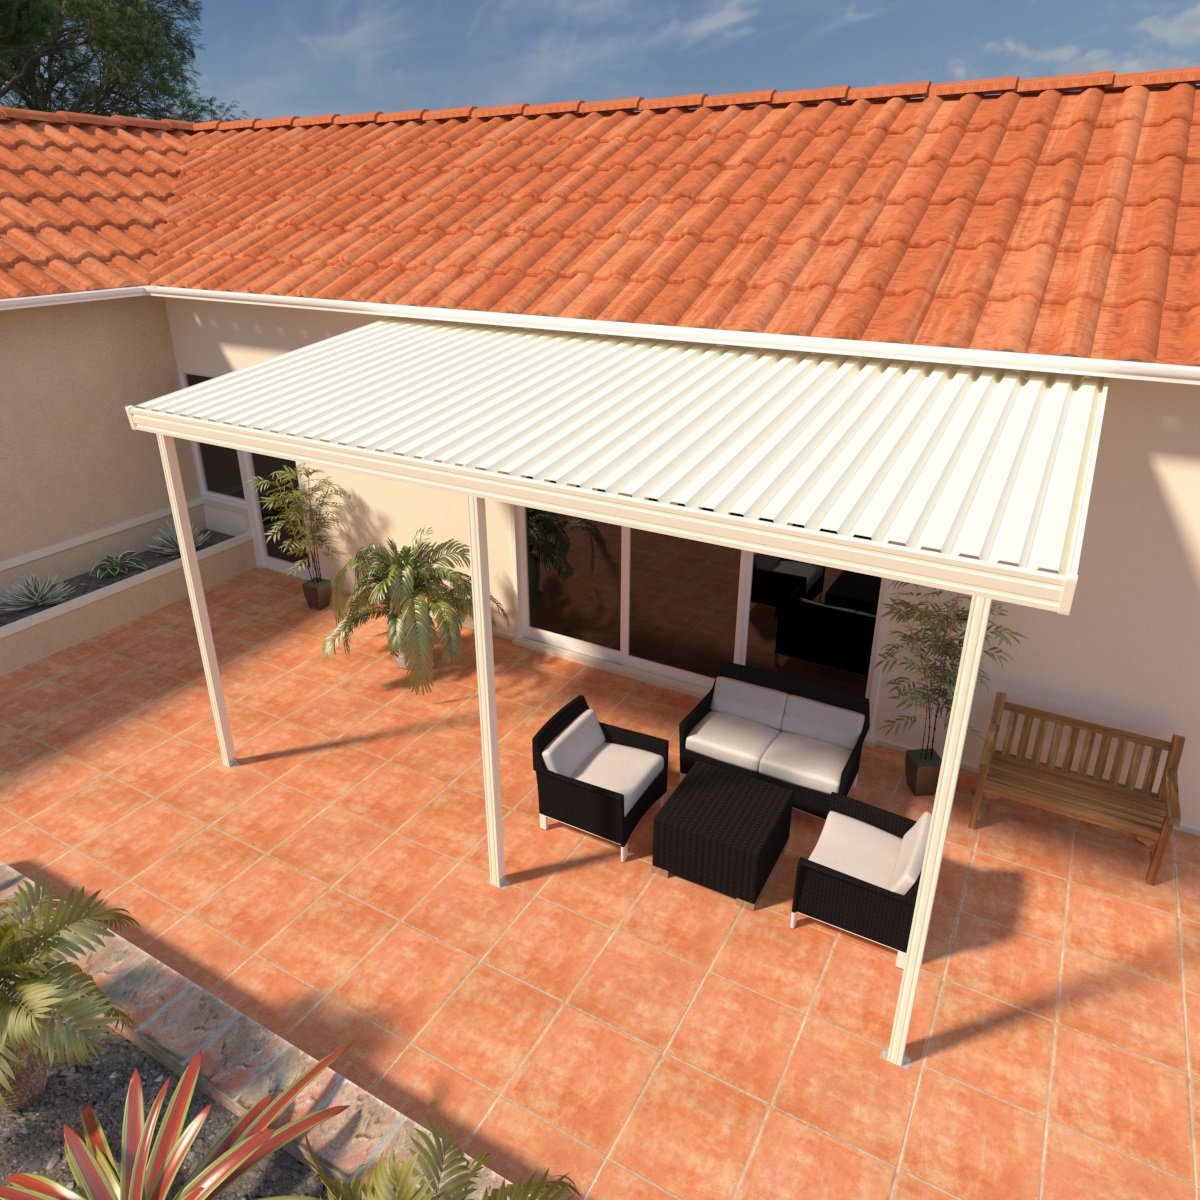 08 ft. Deep x 20 ft. Wide Ivory Attached Aluminum Patio Cover -3 Posts - (10lb Low Snow Area)